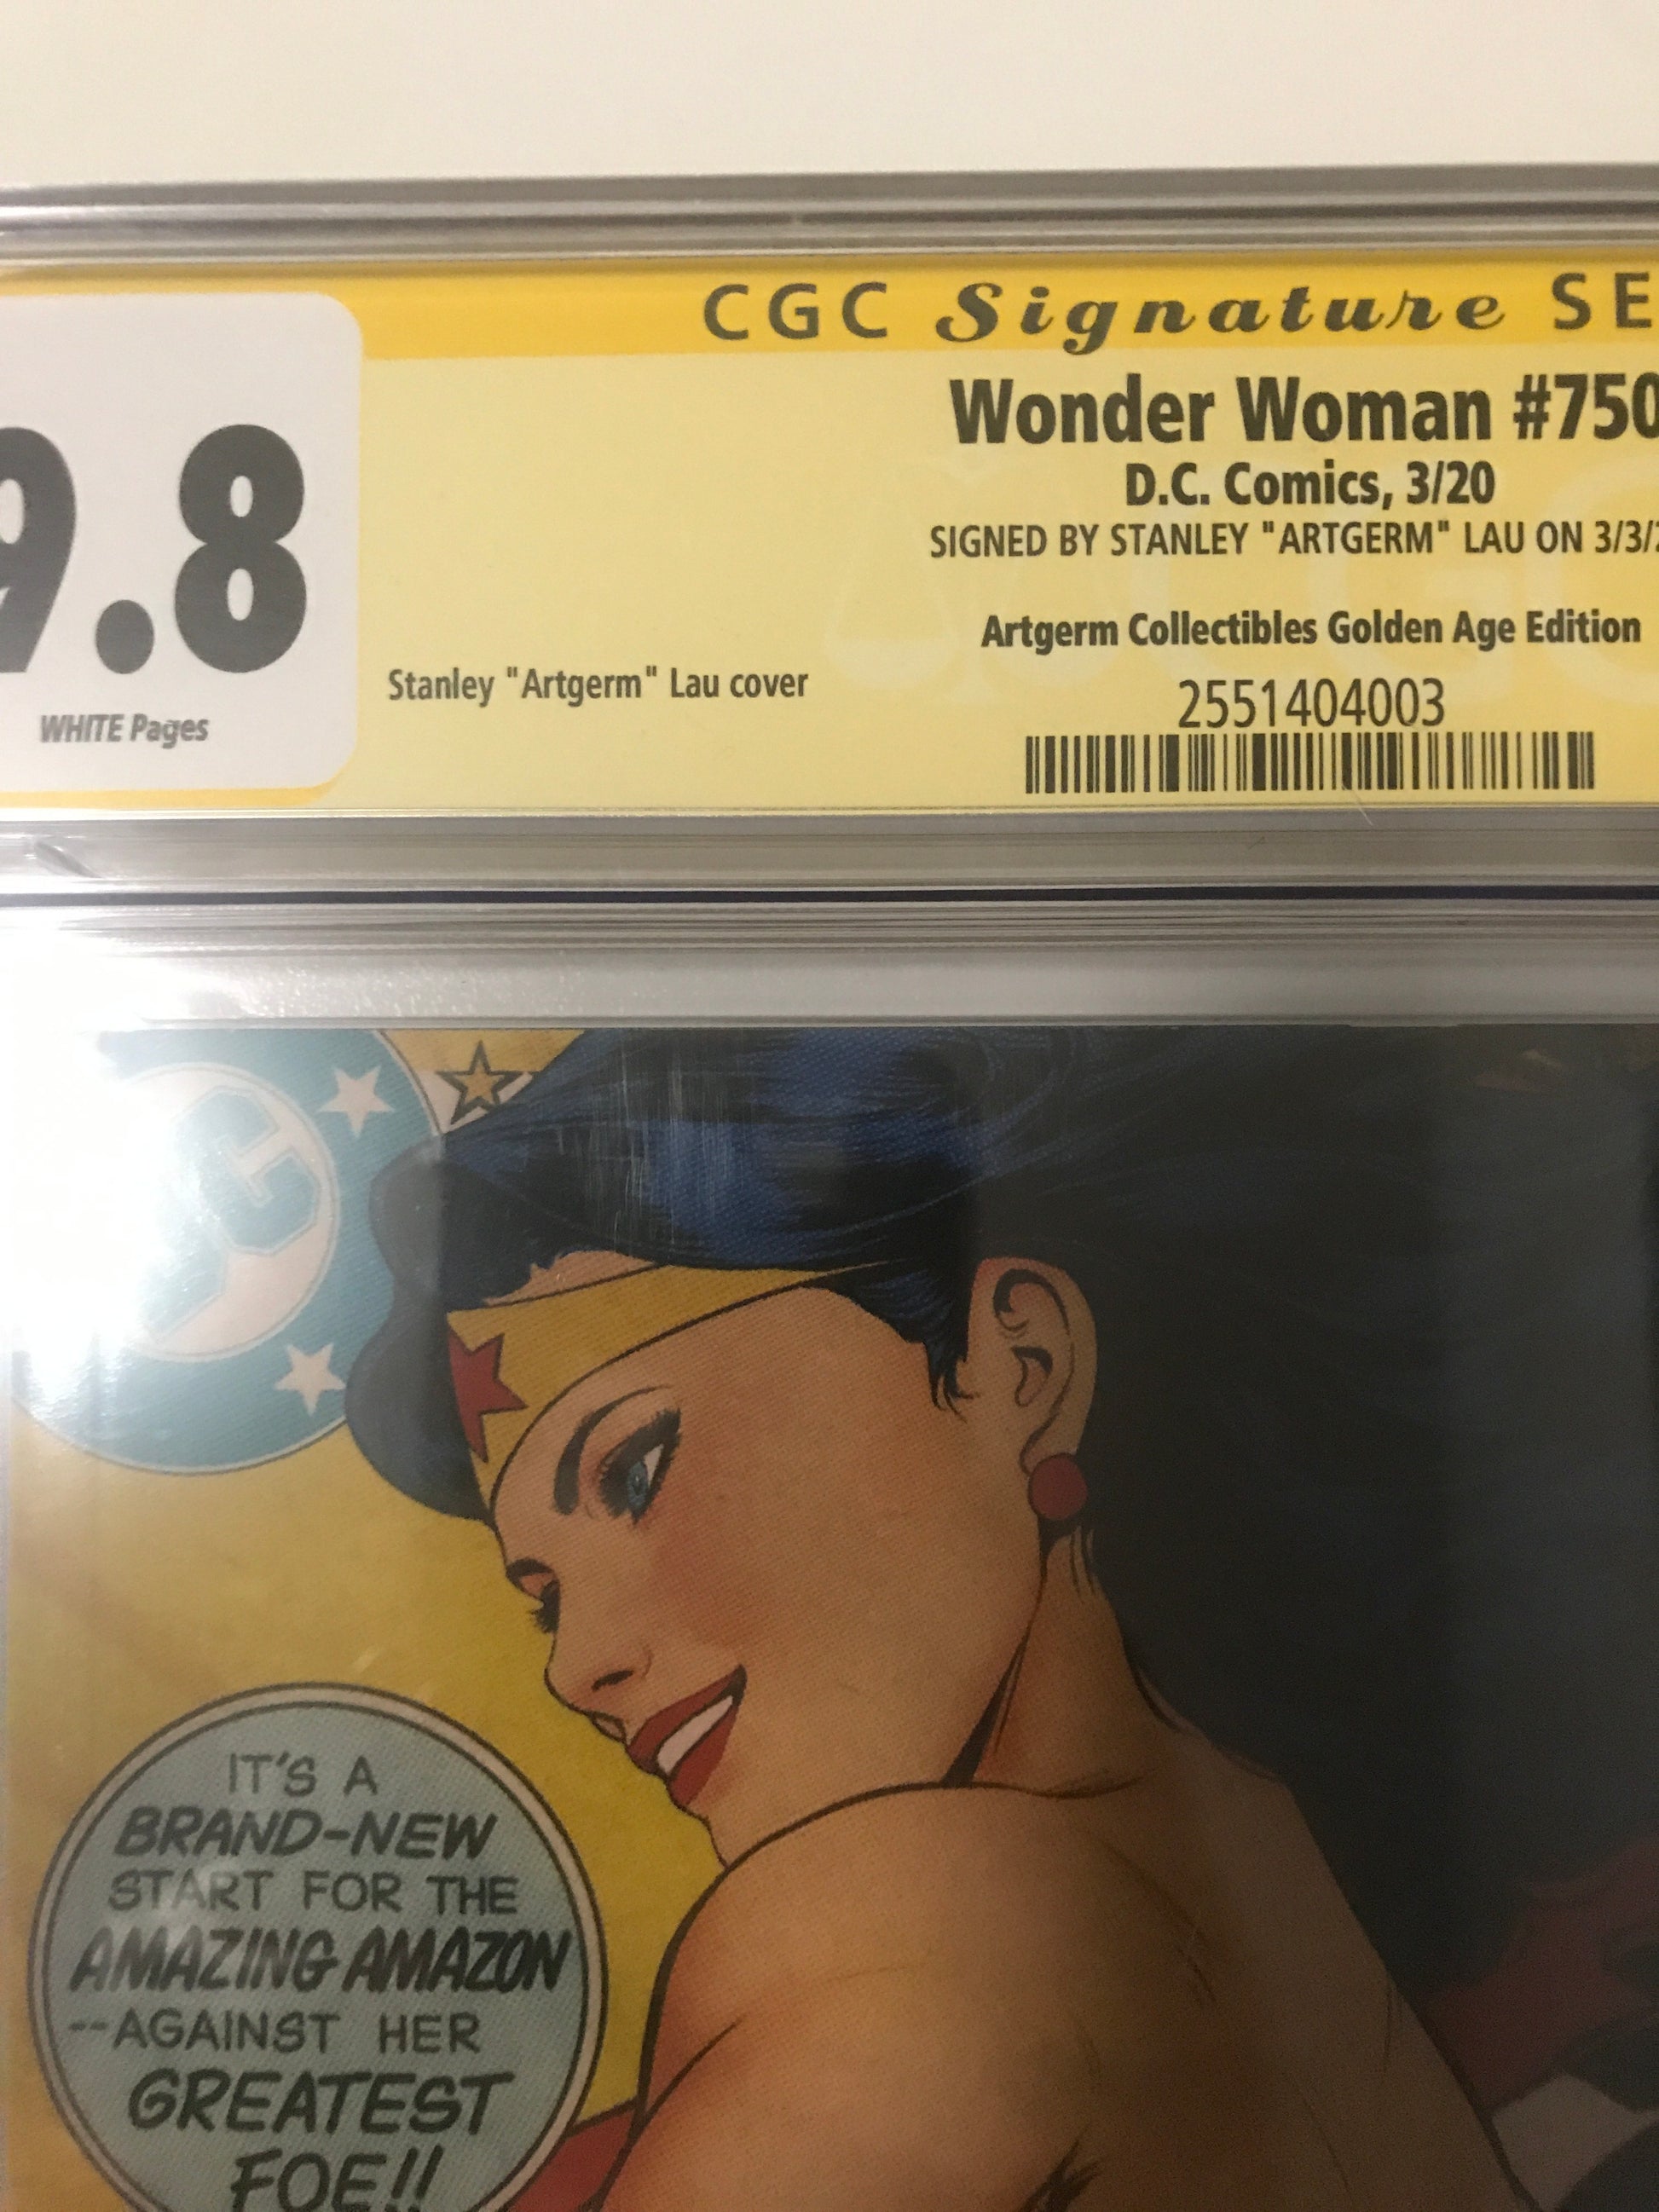 Wonder Woman 750 Golden Age Variant - CGC Signed by Artgerm - Heroes Cave